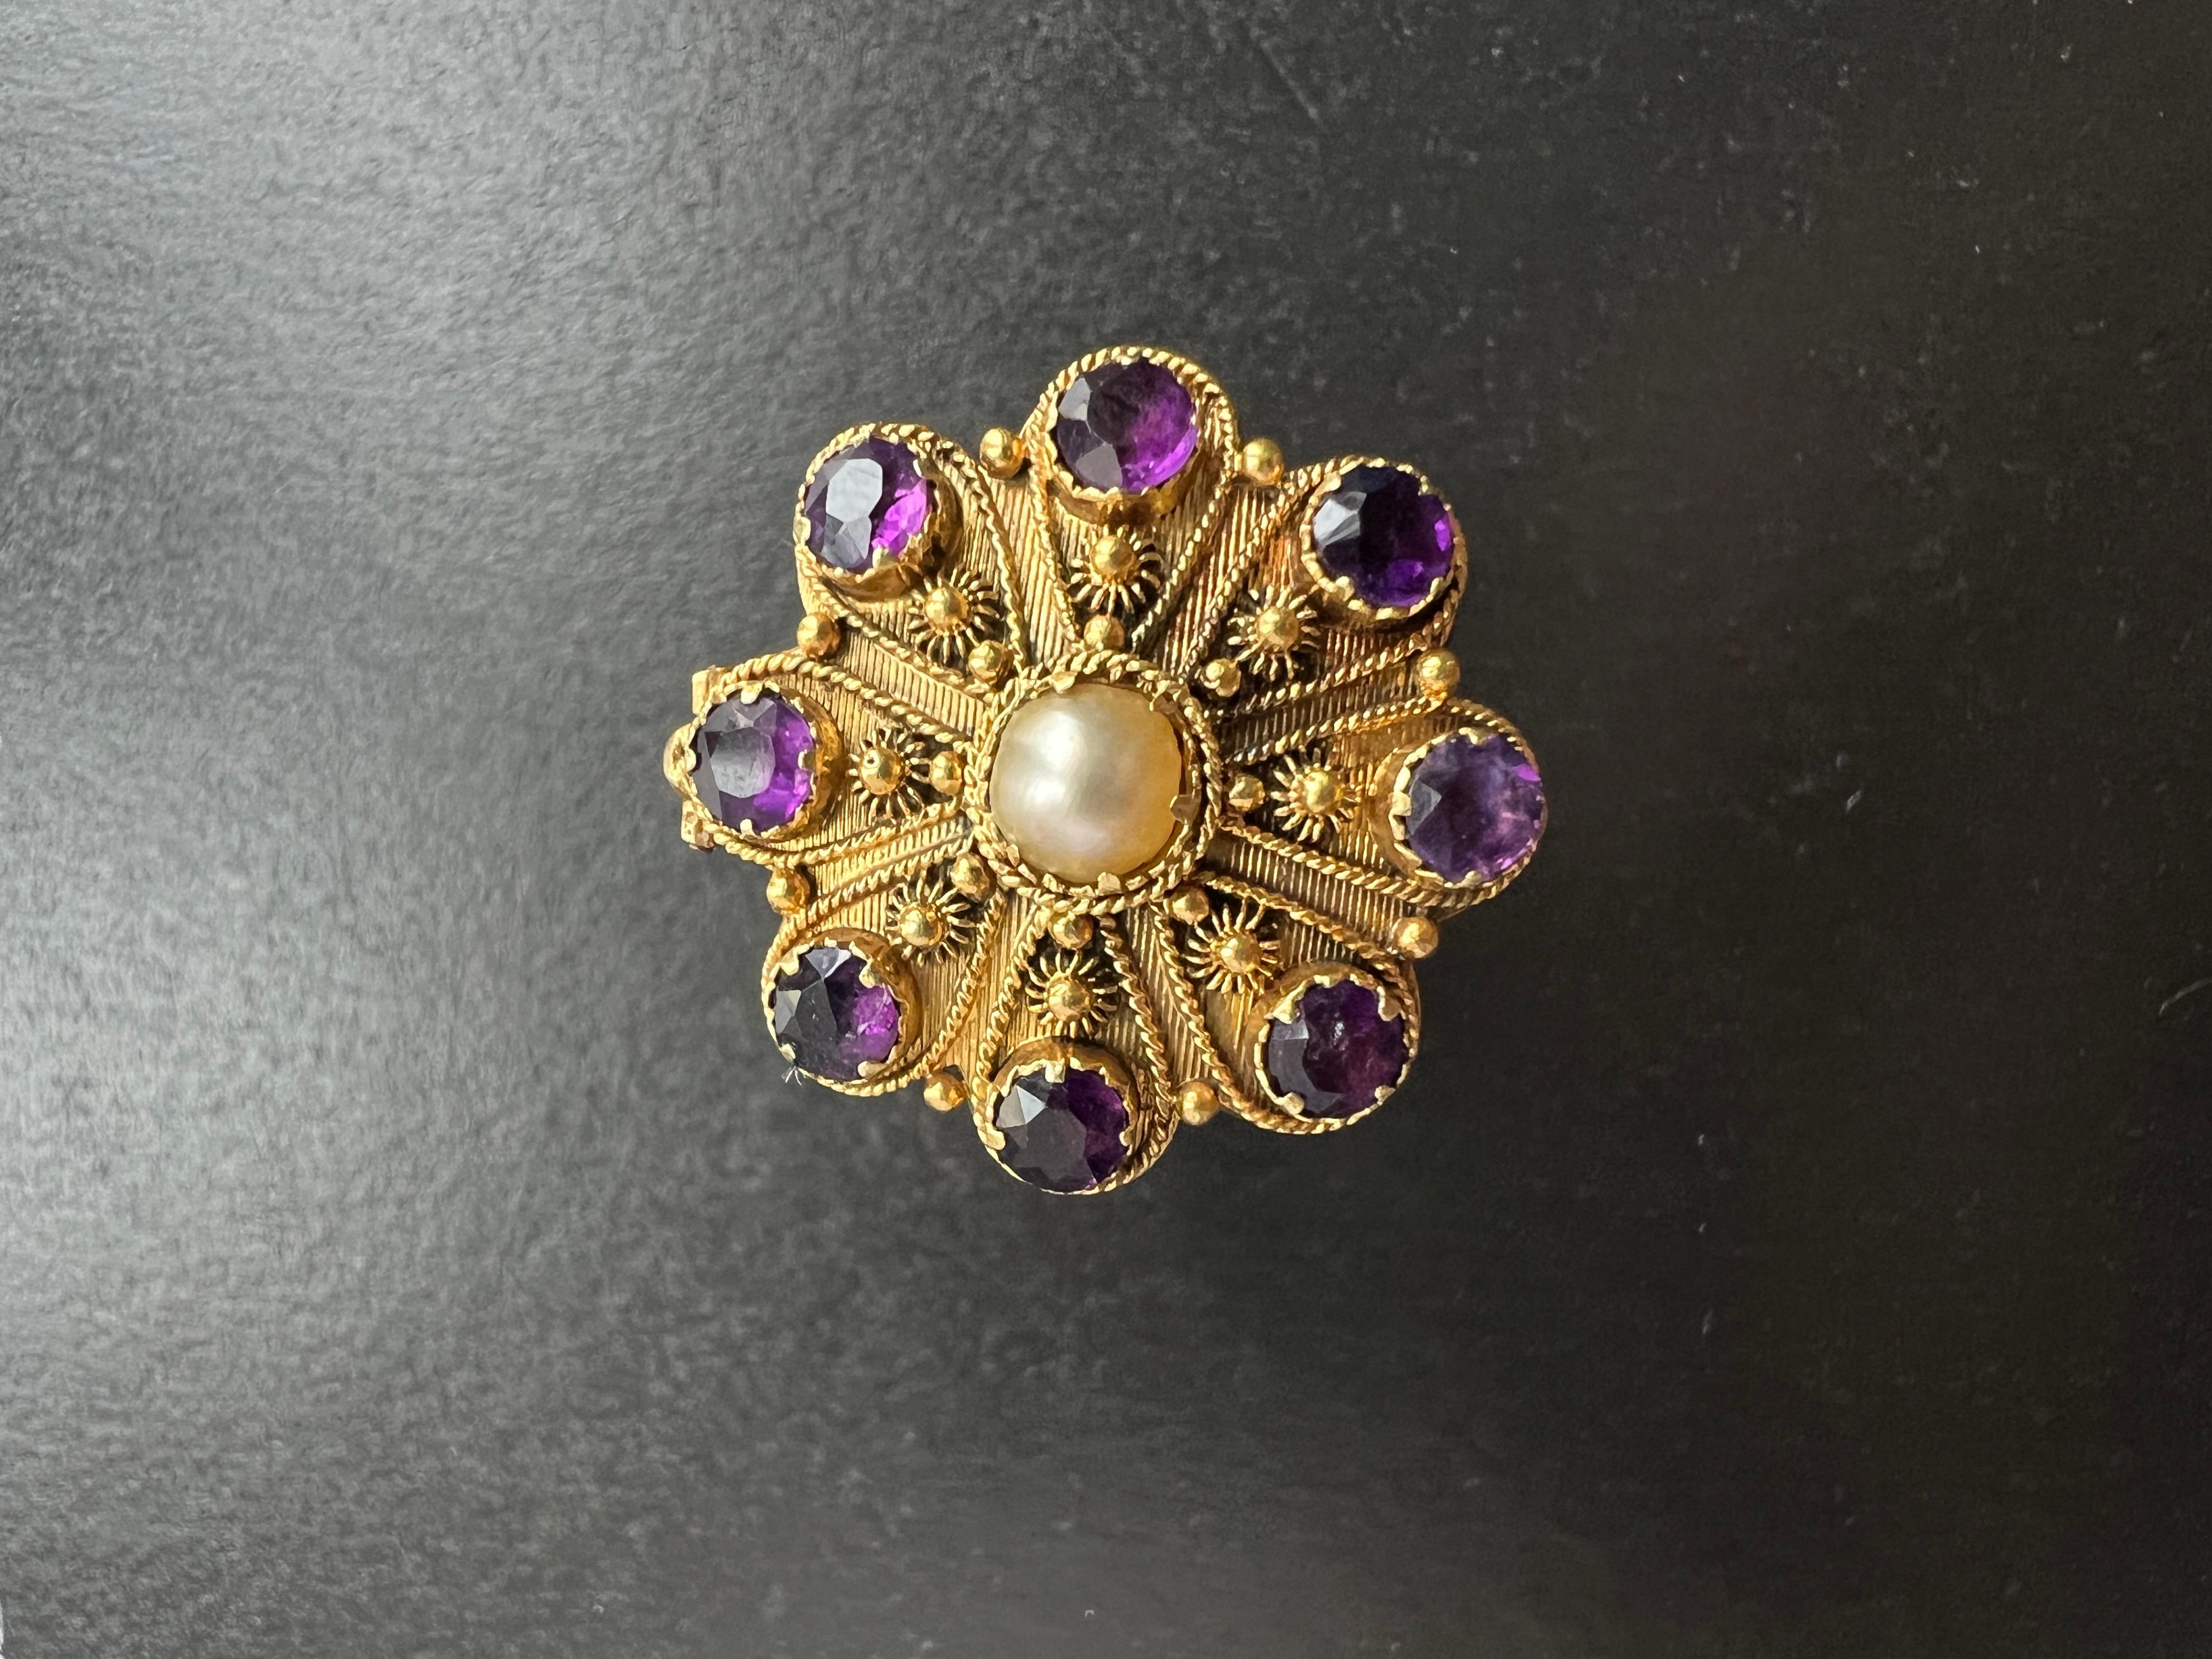 For sale a magnificent 14K gold secret box ring (also called poison ring). The ring features a rare flower box container on the ring’s head, which is decorated with 8 amethyst stones on the petals. The gem shows a vibrant purple color, contrasting